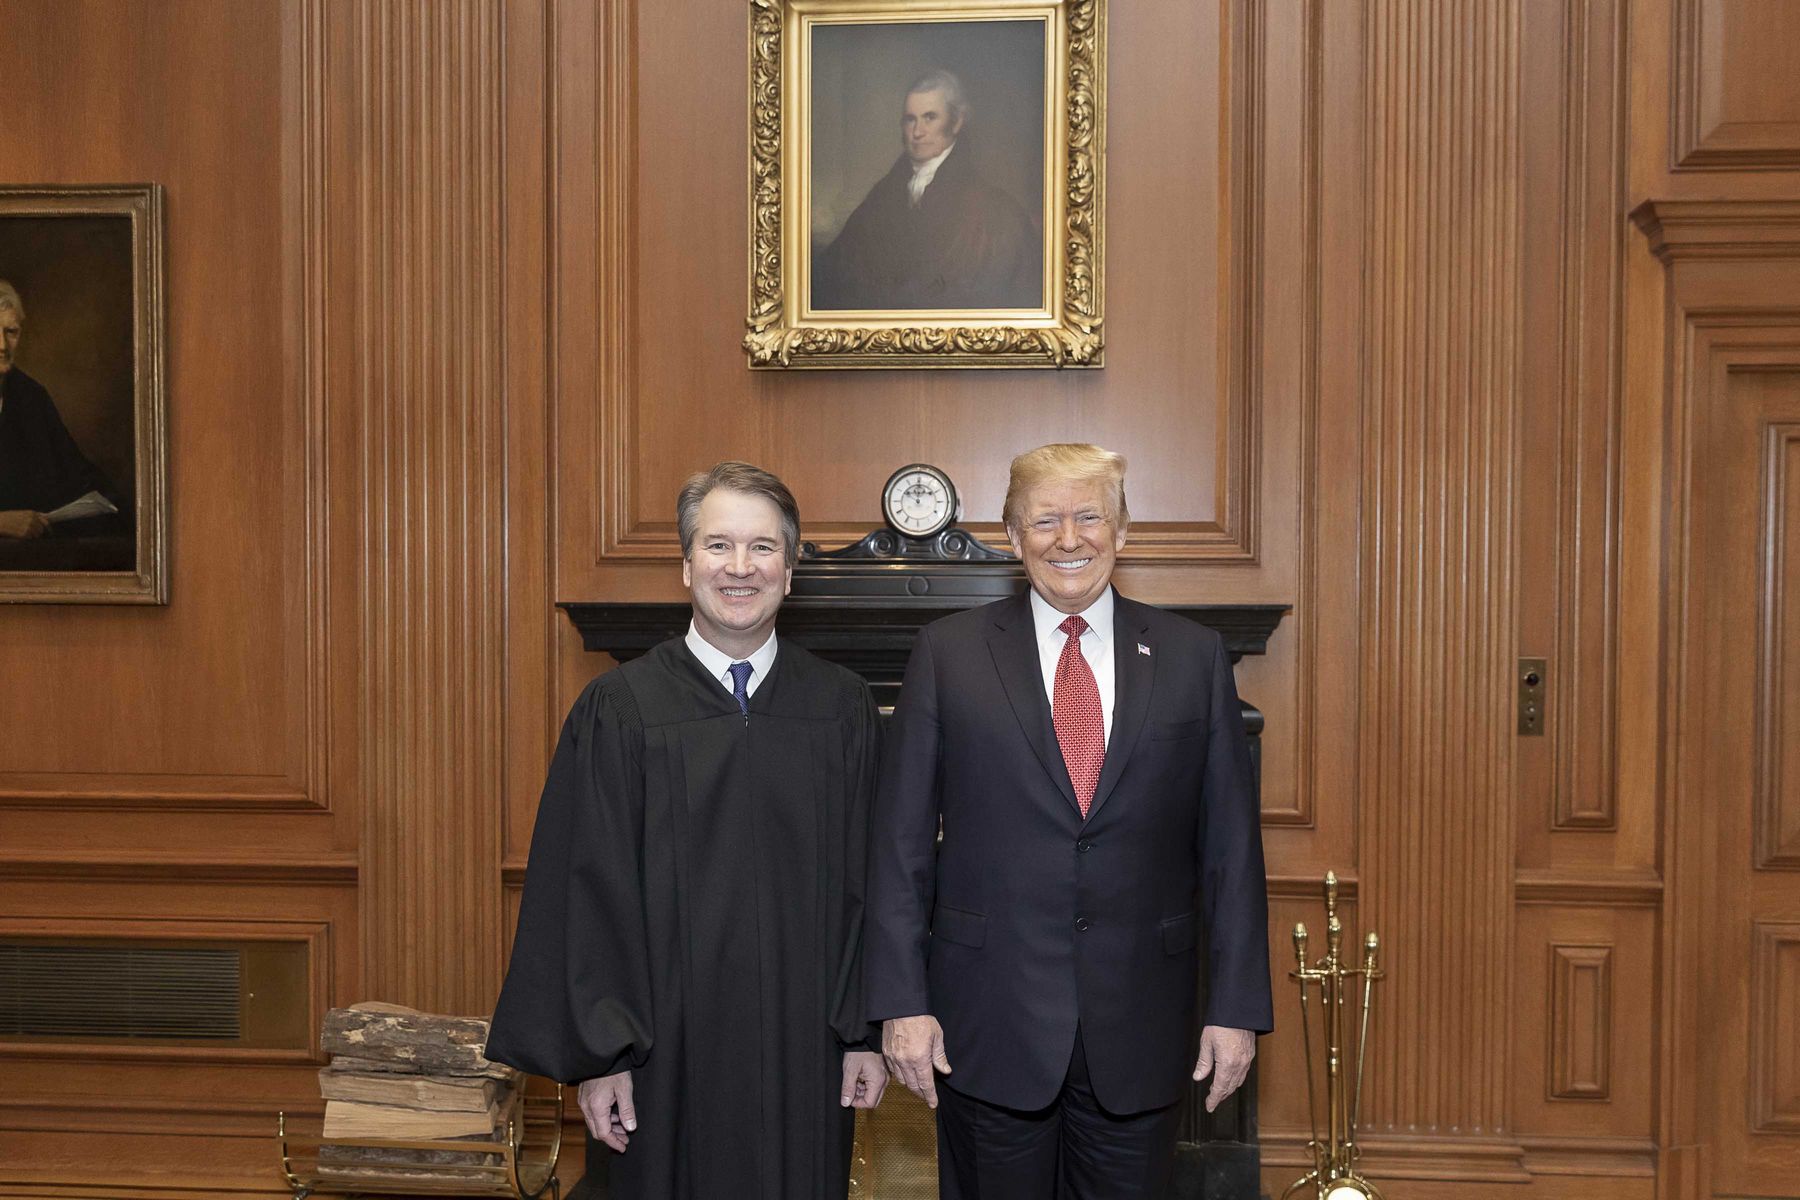 President Donald J. Trump and First Lady Melania Trump participate in a meet and greet with Supreme Court Justices